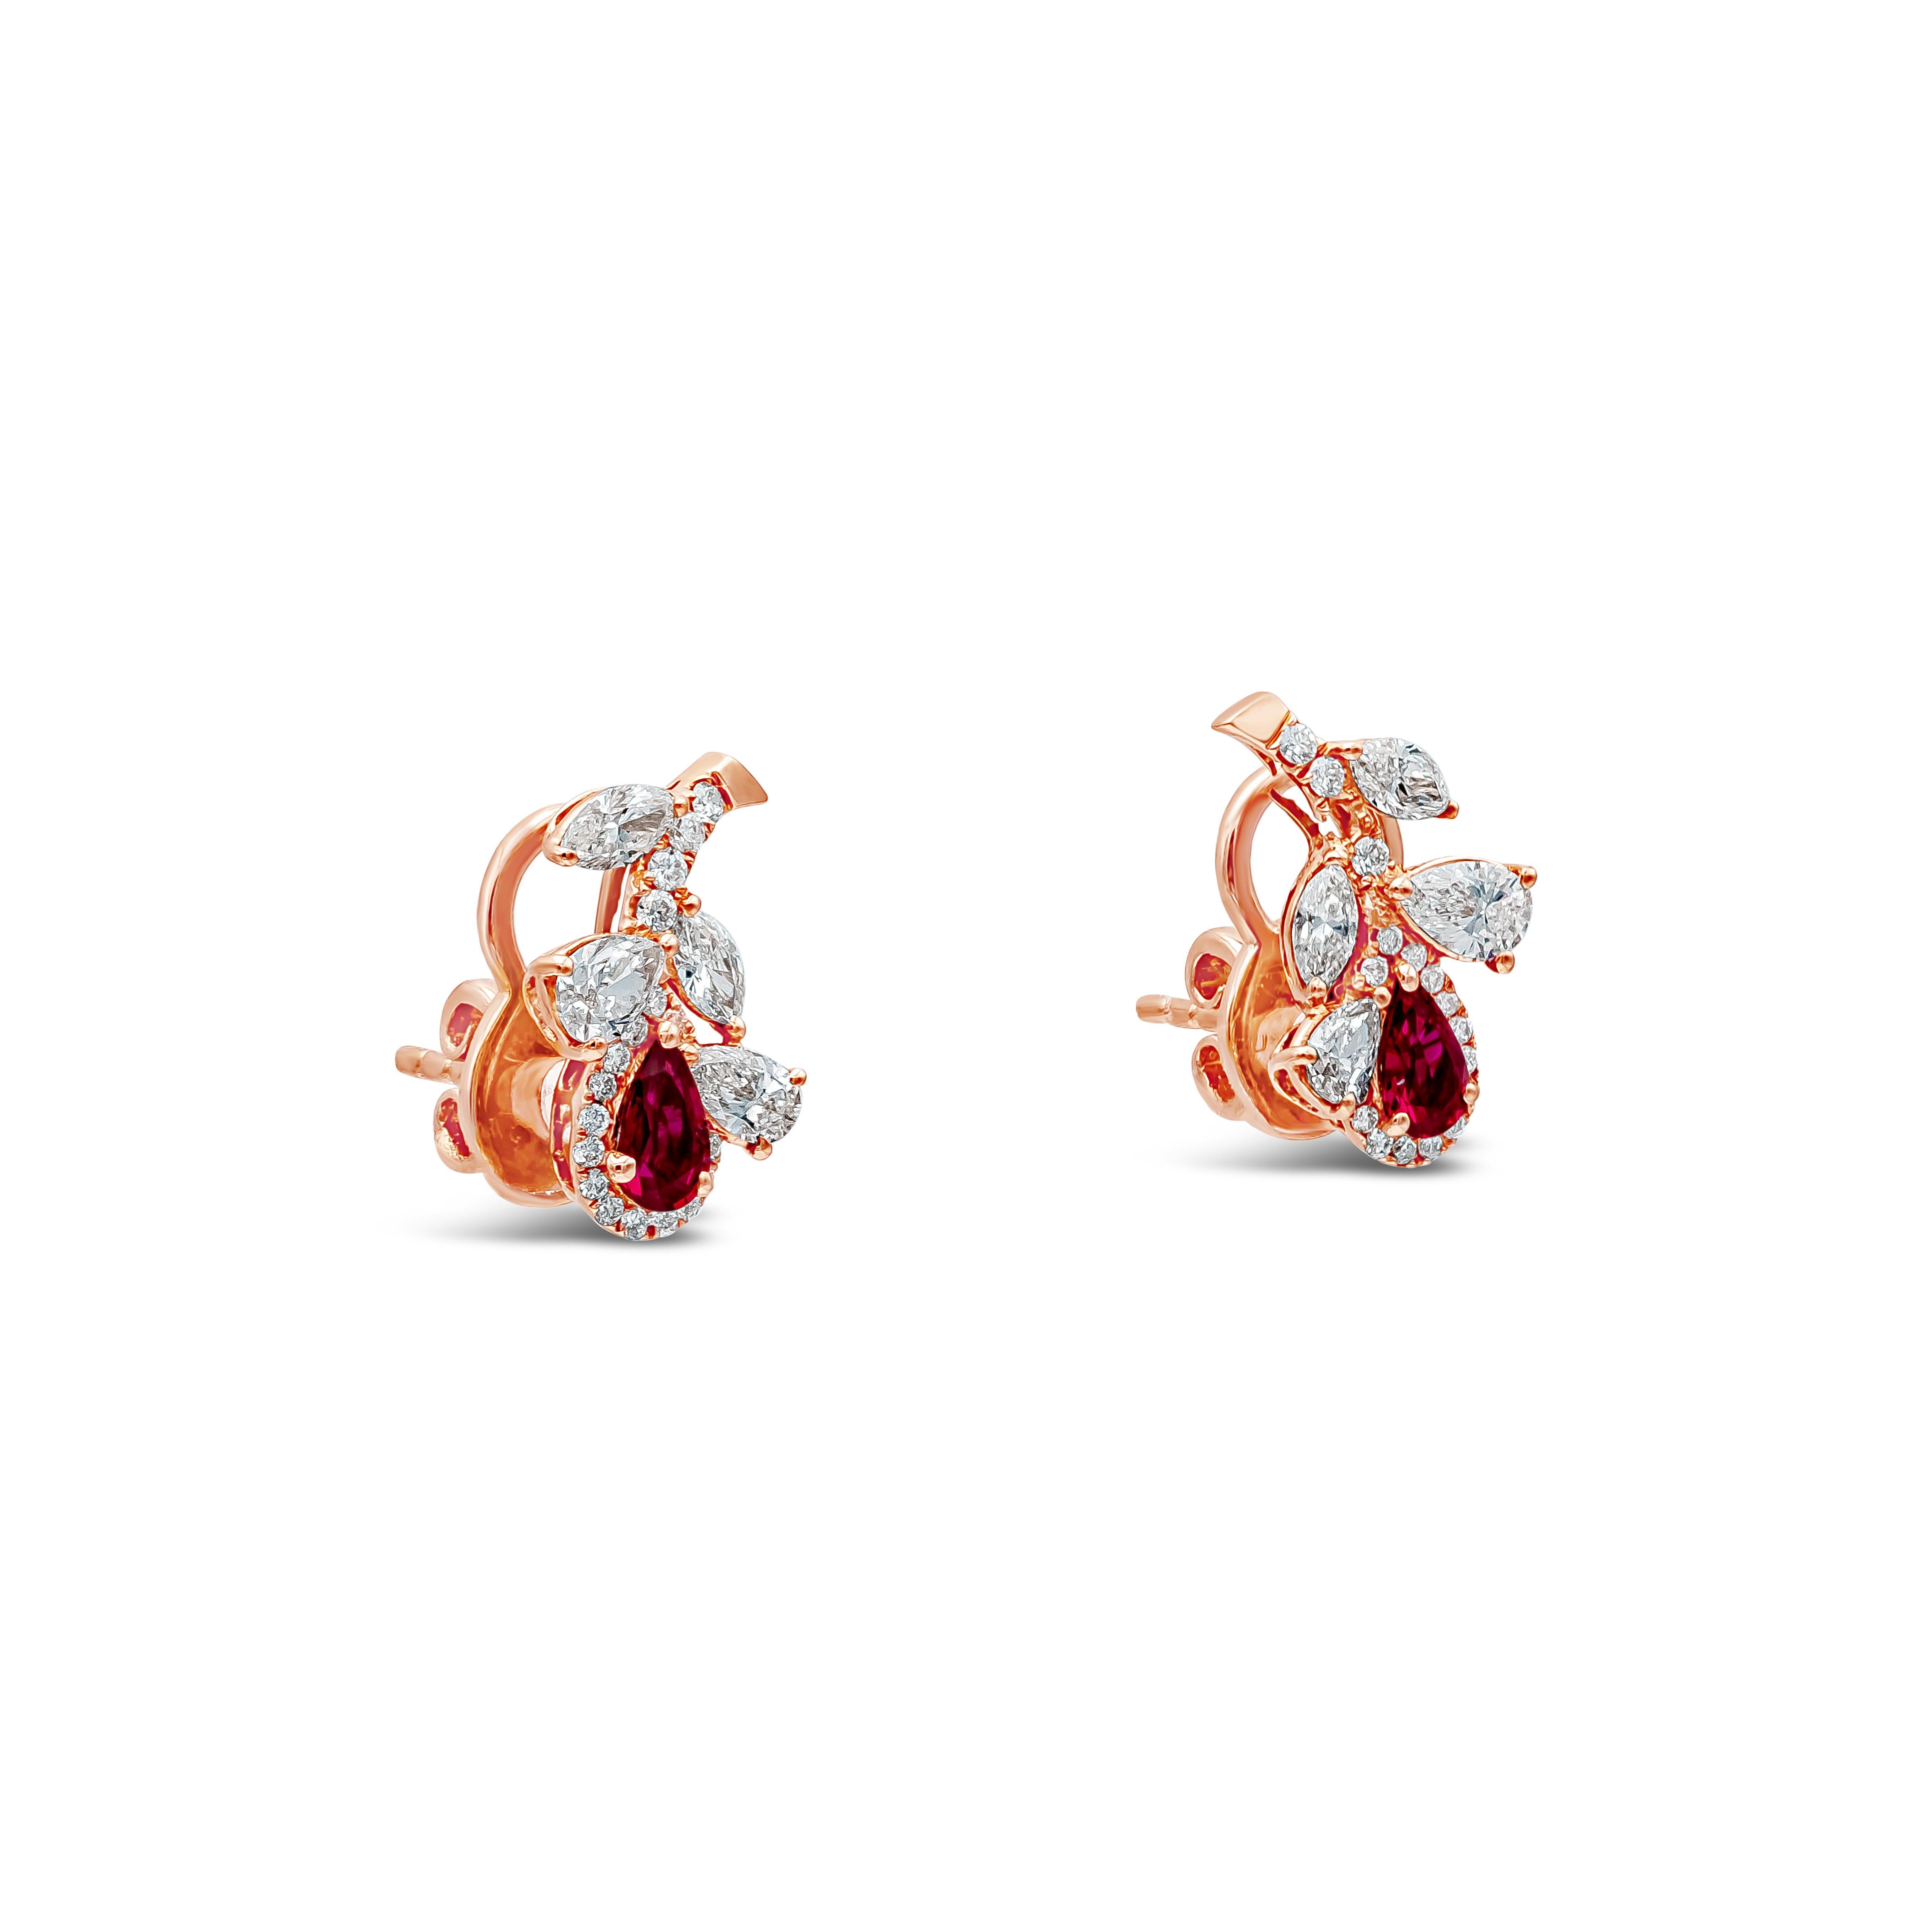 A fashionable pair of earrings featuring a pear and marquise cut diamond, blue sapphires and red rubies in pear shape set in a flower. The flower is set with a pear and marquise cut diamond that weighs about 0.69 carat total, approximately F-G